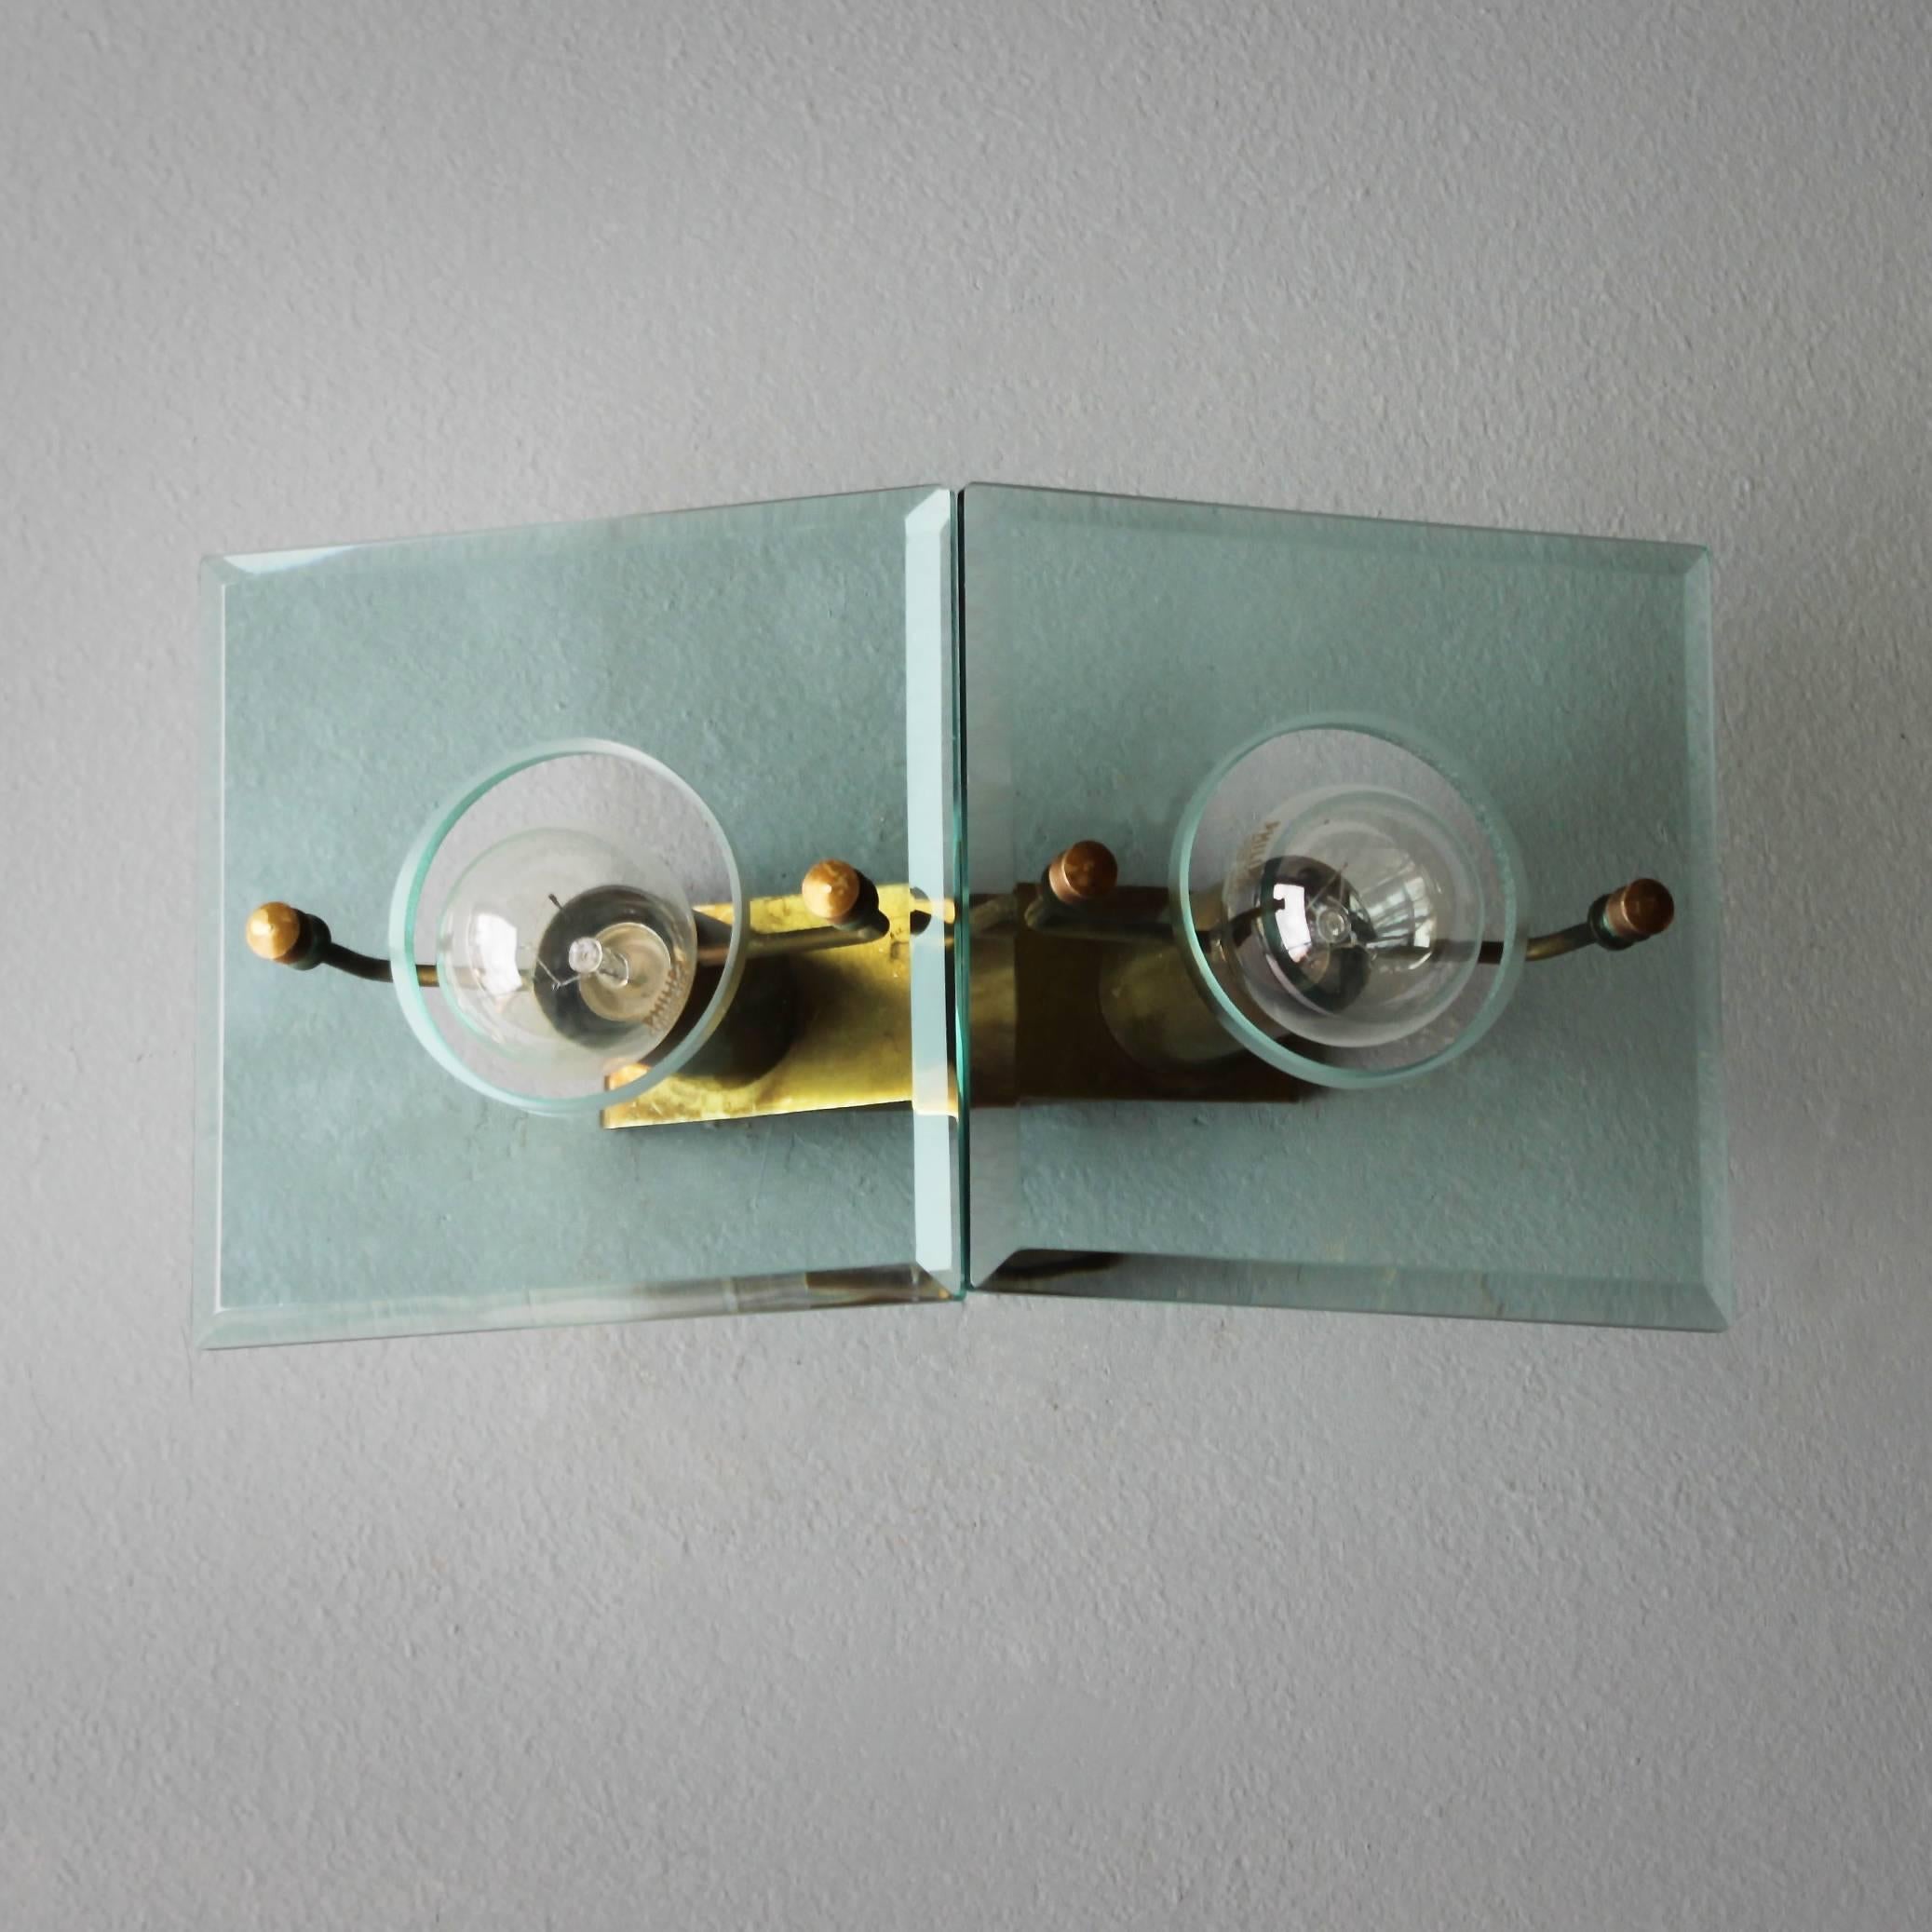 A brass and cut-glass wall light Gino Paroldo for Dino Dei, Italy. 
Dimensions: Depth 4.5 in. (11.5 cm), width 10.4 in. (26,5 cm), height 5.5 inches (14 cm).
The electricity is used but in a good condition, approved to European standards. Works in